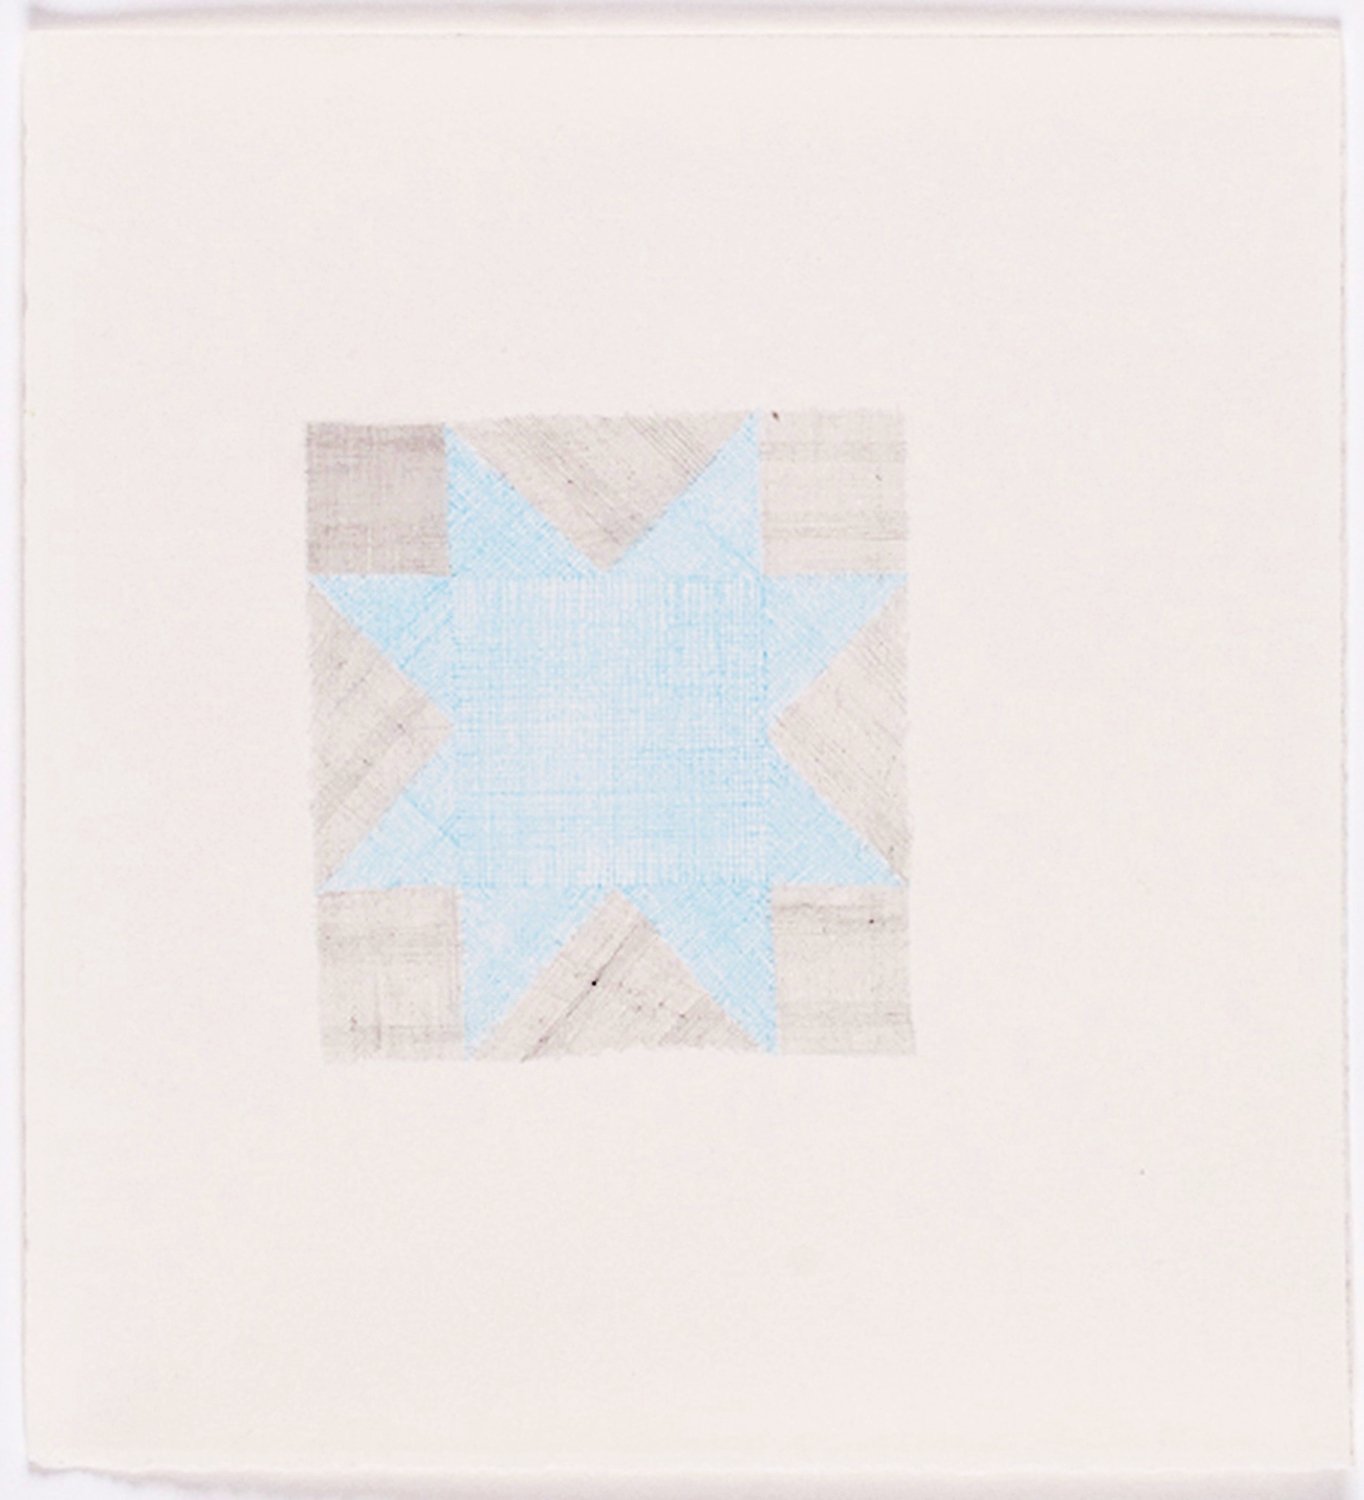  Quilt Square in Blue. 2009. Color Pencil on Paper. 14" x 13" 